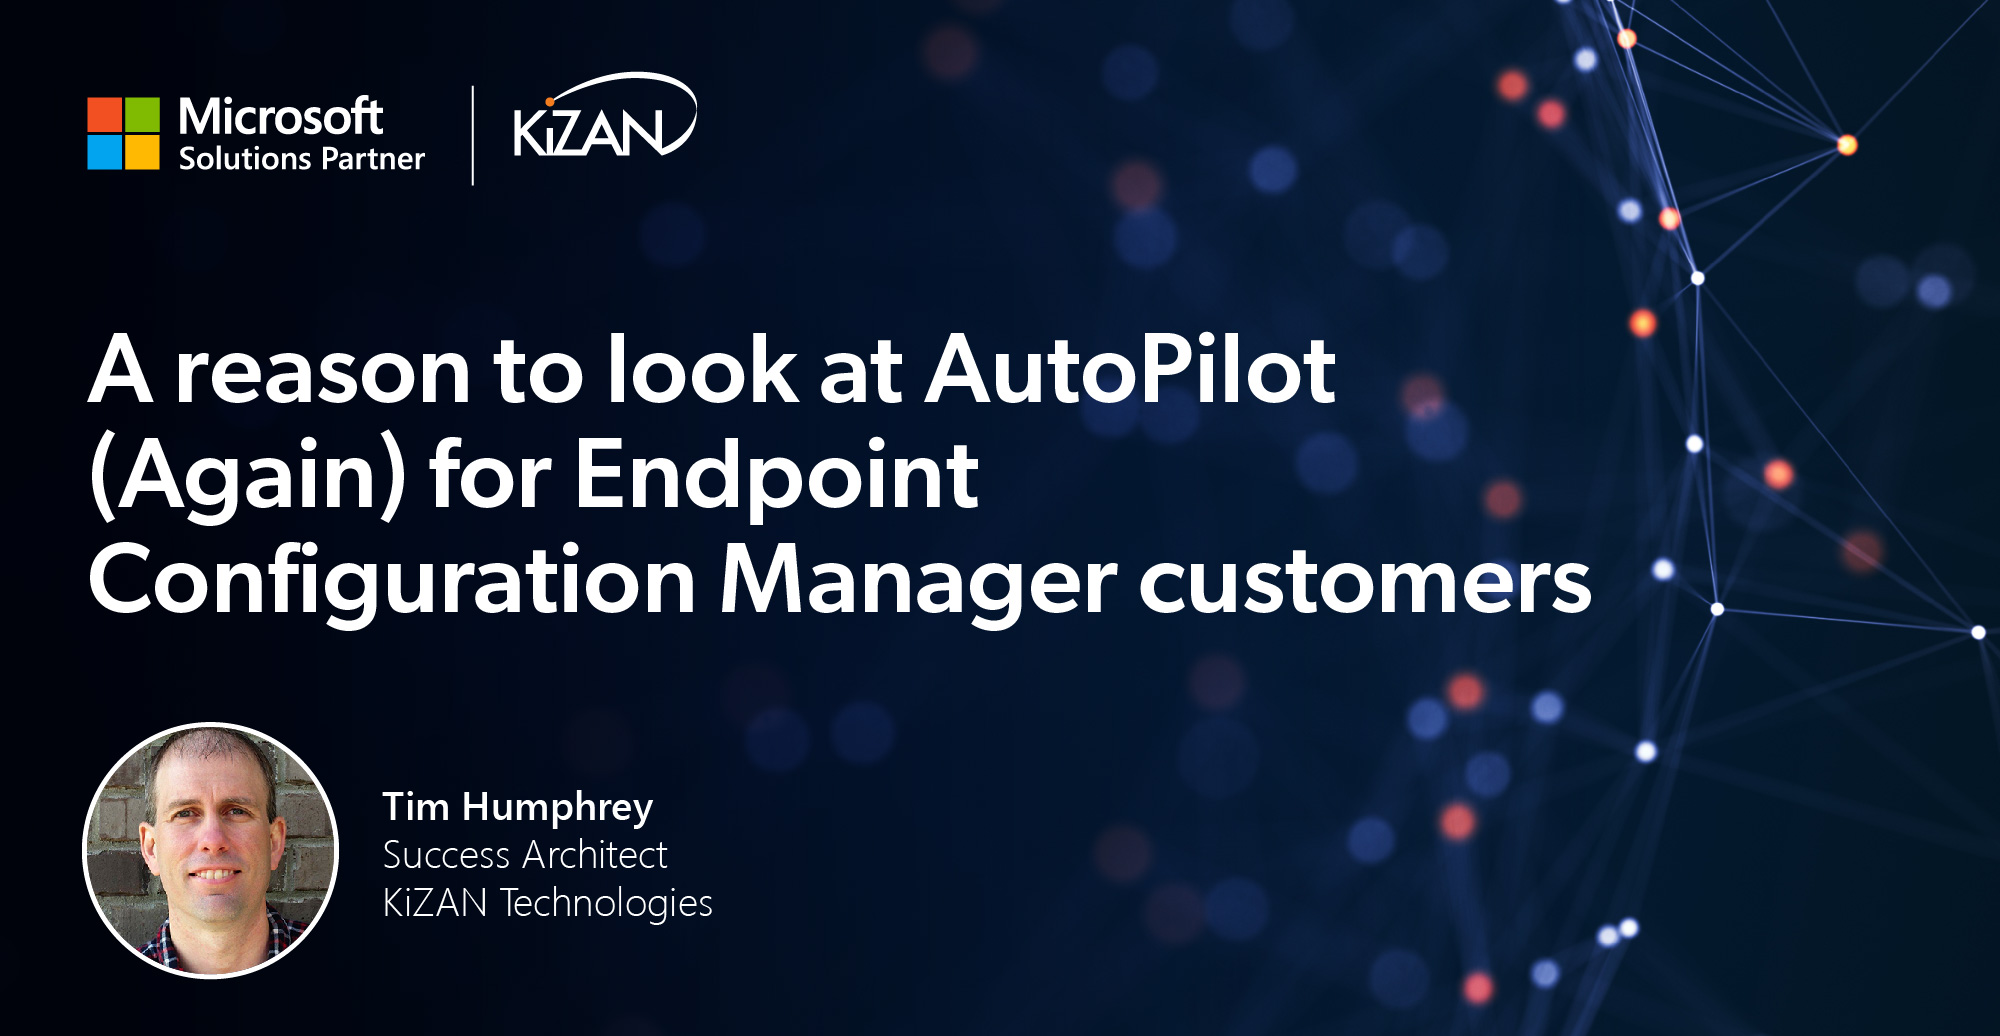 A reason to look at AutoPilot (Again) for Endpoint Configuration Manager customers